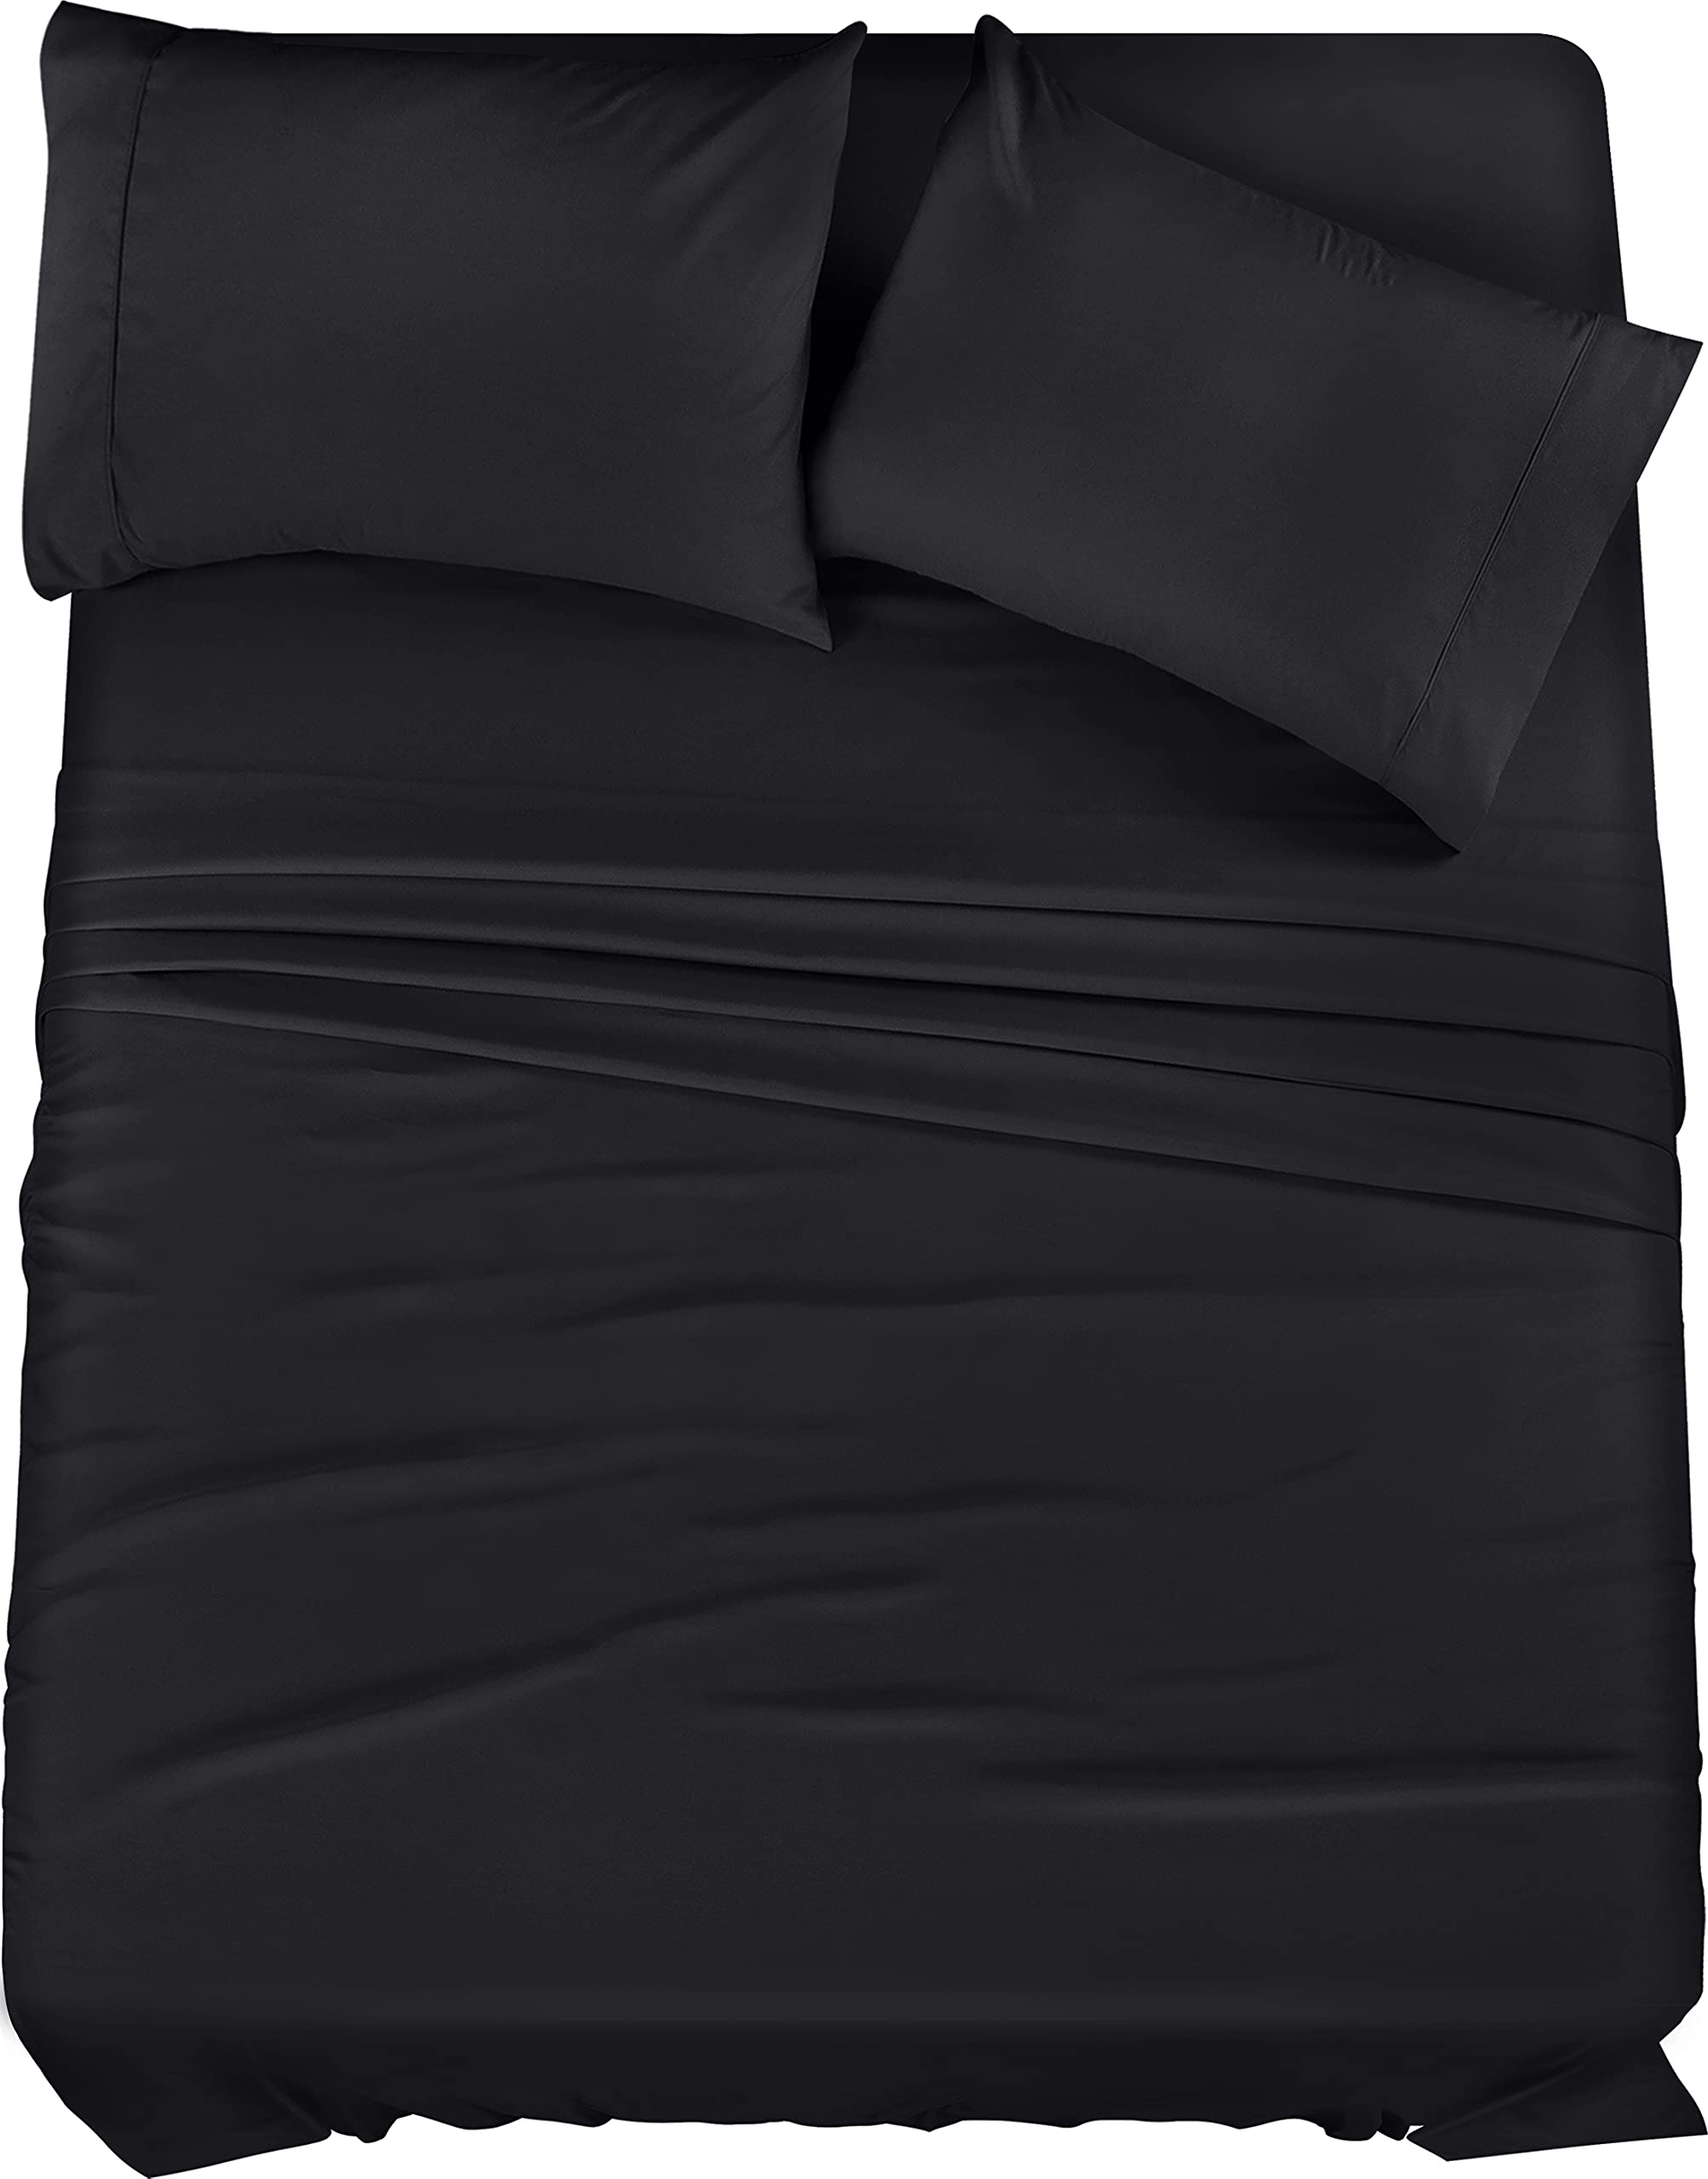 Book Cover Utopia Bedding King Bed Sheets Set - 4 Piece Bedding - Brushed Microfiber - Shrinkage and Fade Resistant - Easy Care (King, Black) King Black